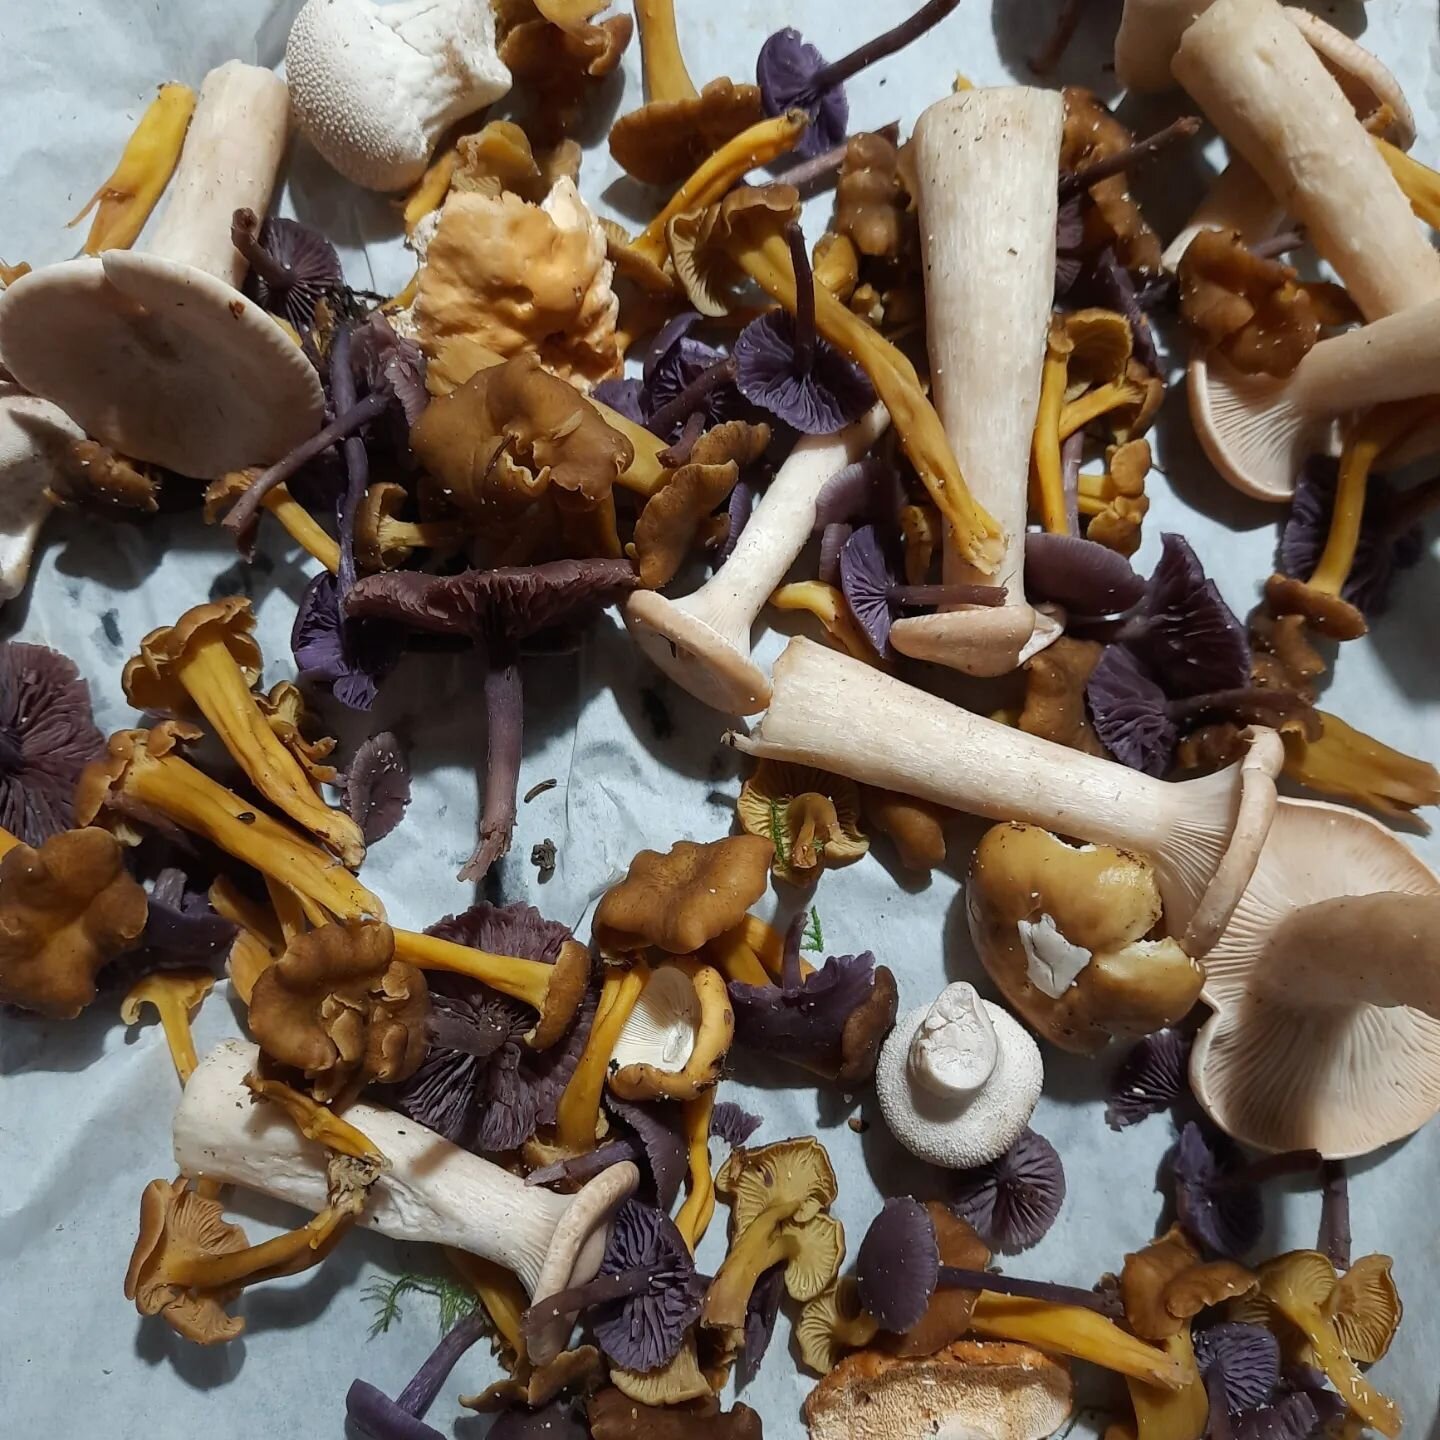 Fantastic day out with Fred Gillam on his secret sunday mushroom foraging group.

A huge amount of winter chanterelles, amethyst deceivers, trooping funnel and more to enjoy, as well as improving my knowledge of wild mushrooms.